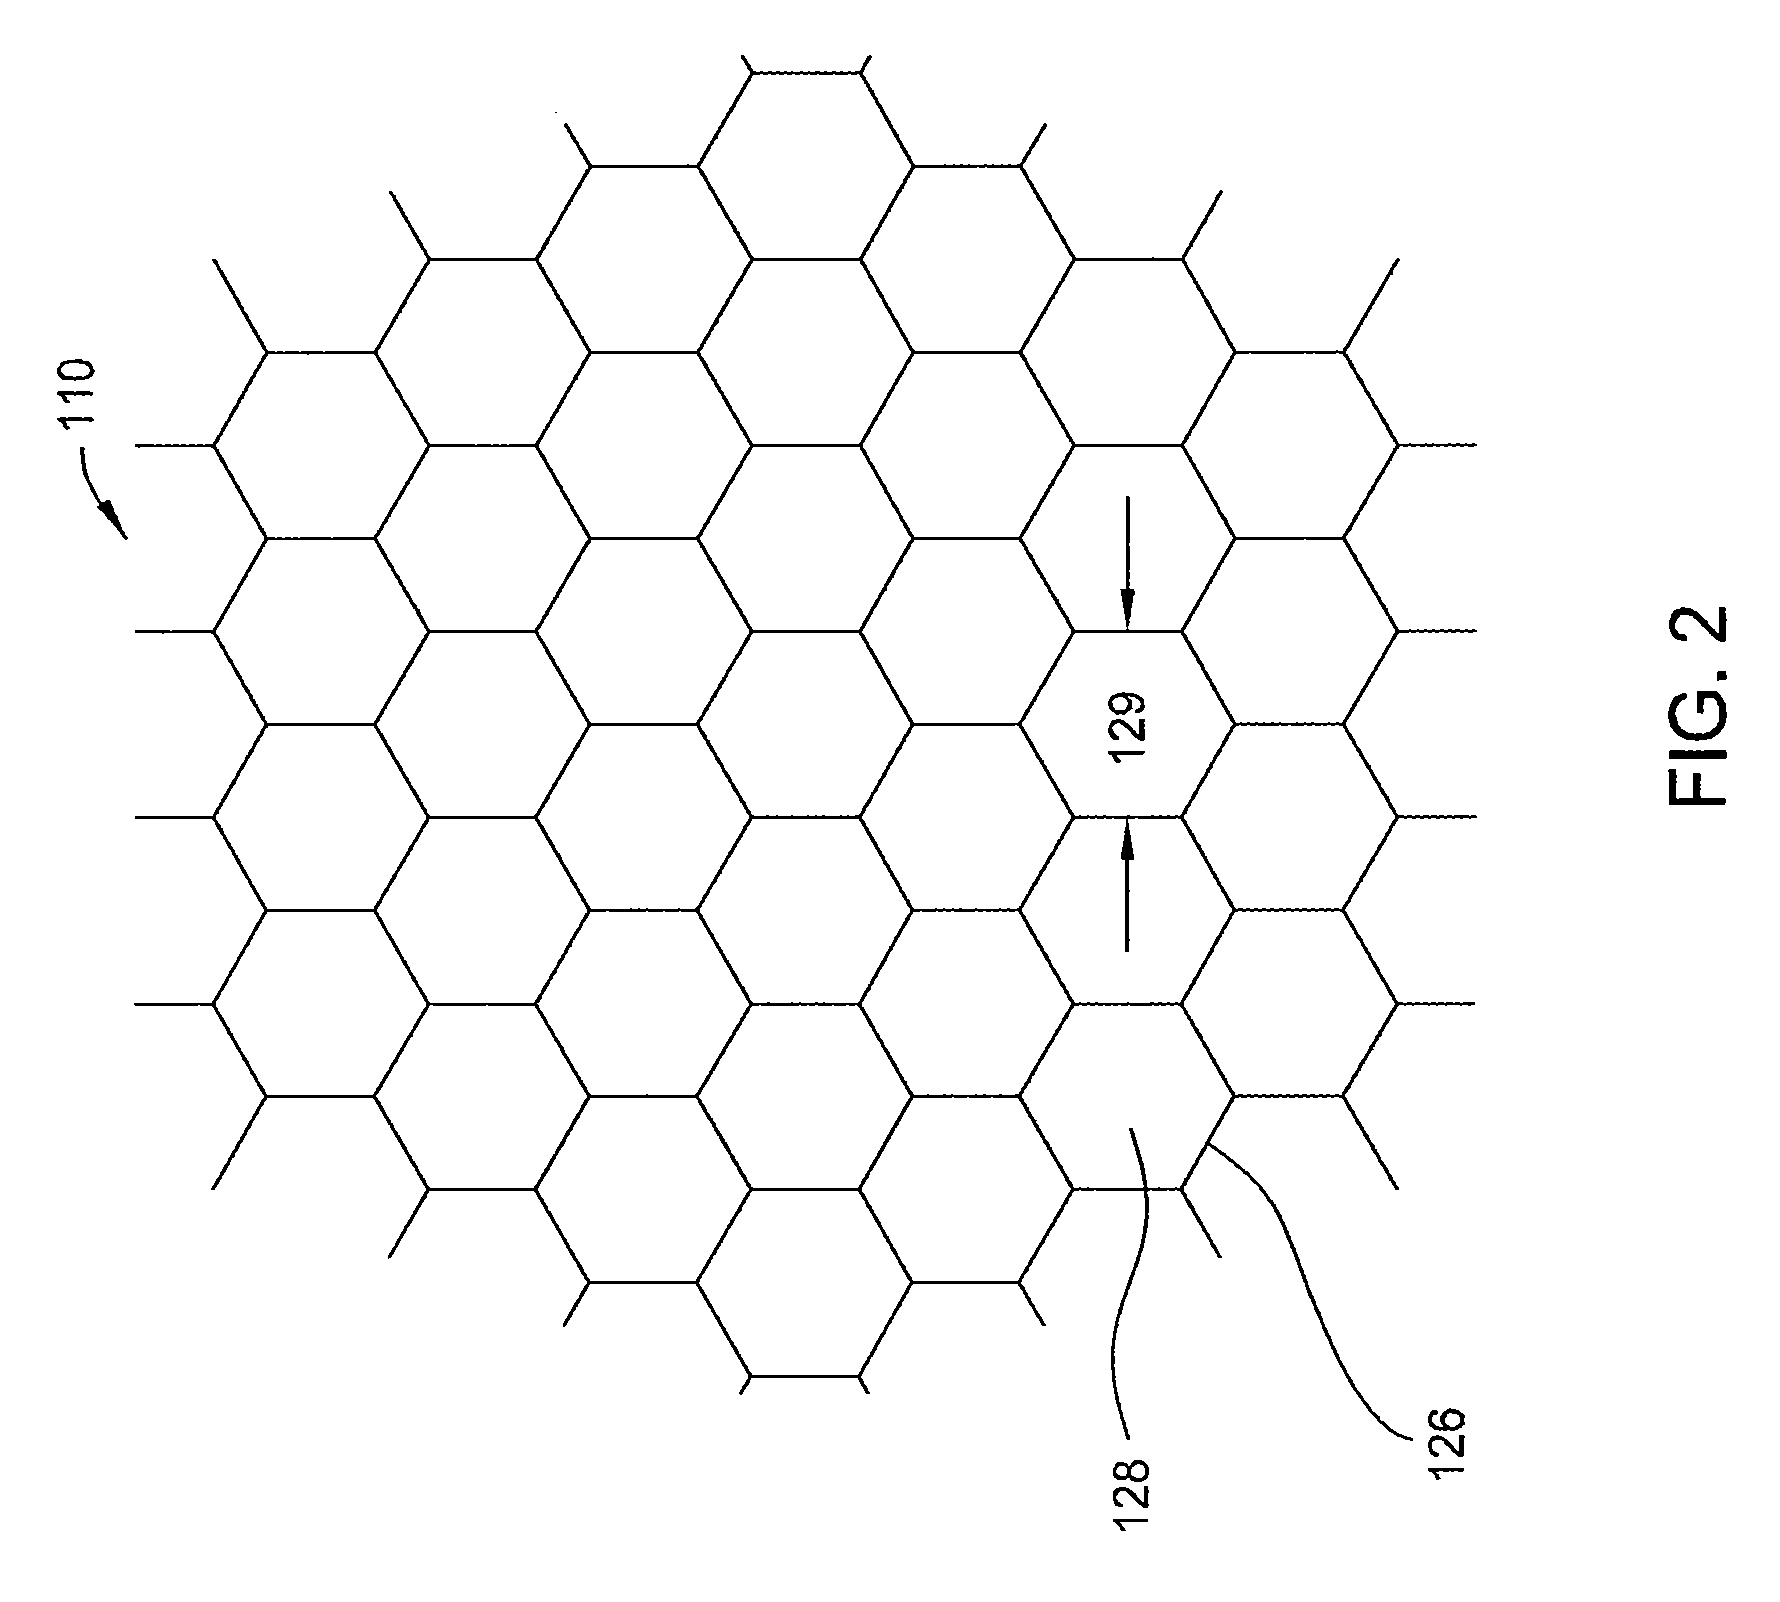 Wafer processing deposition shielding components